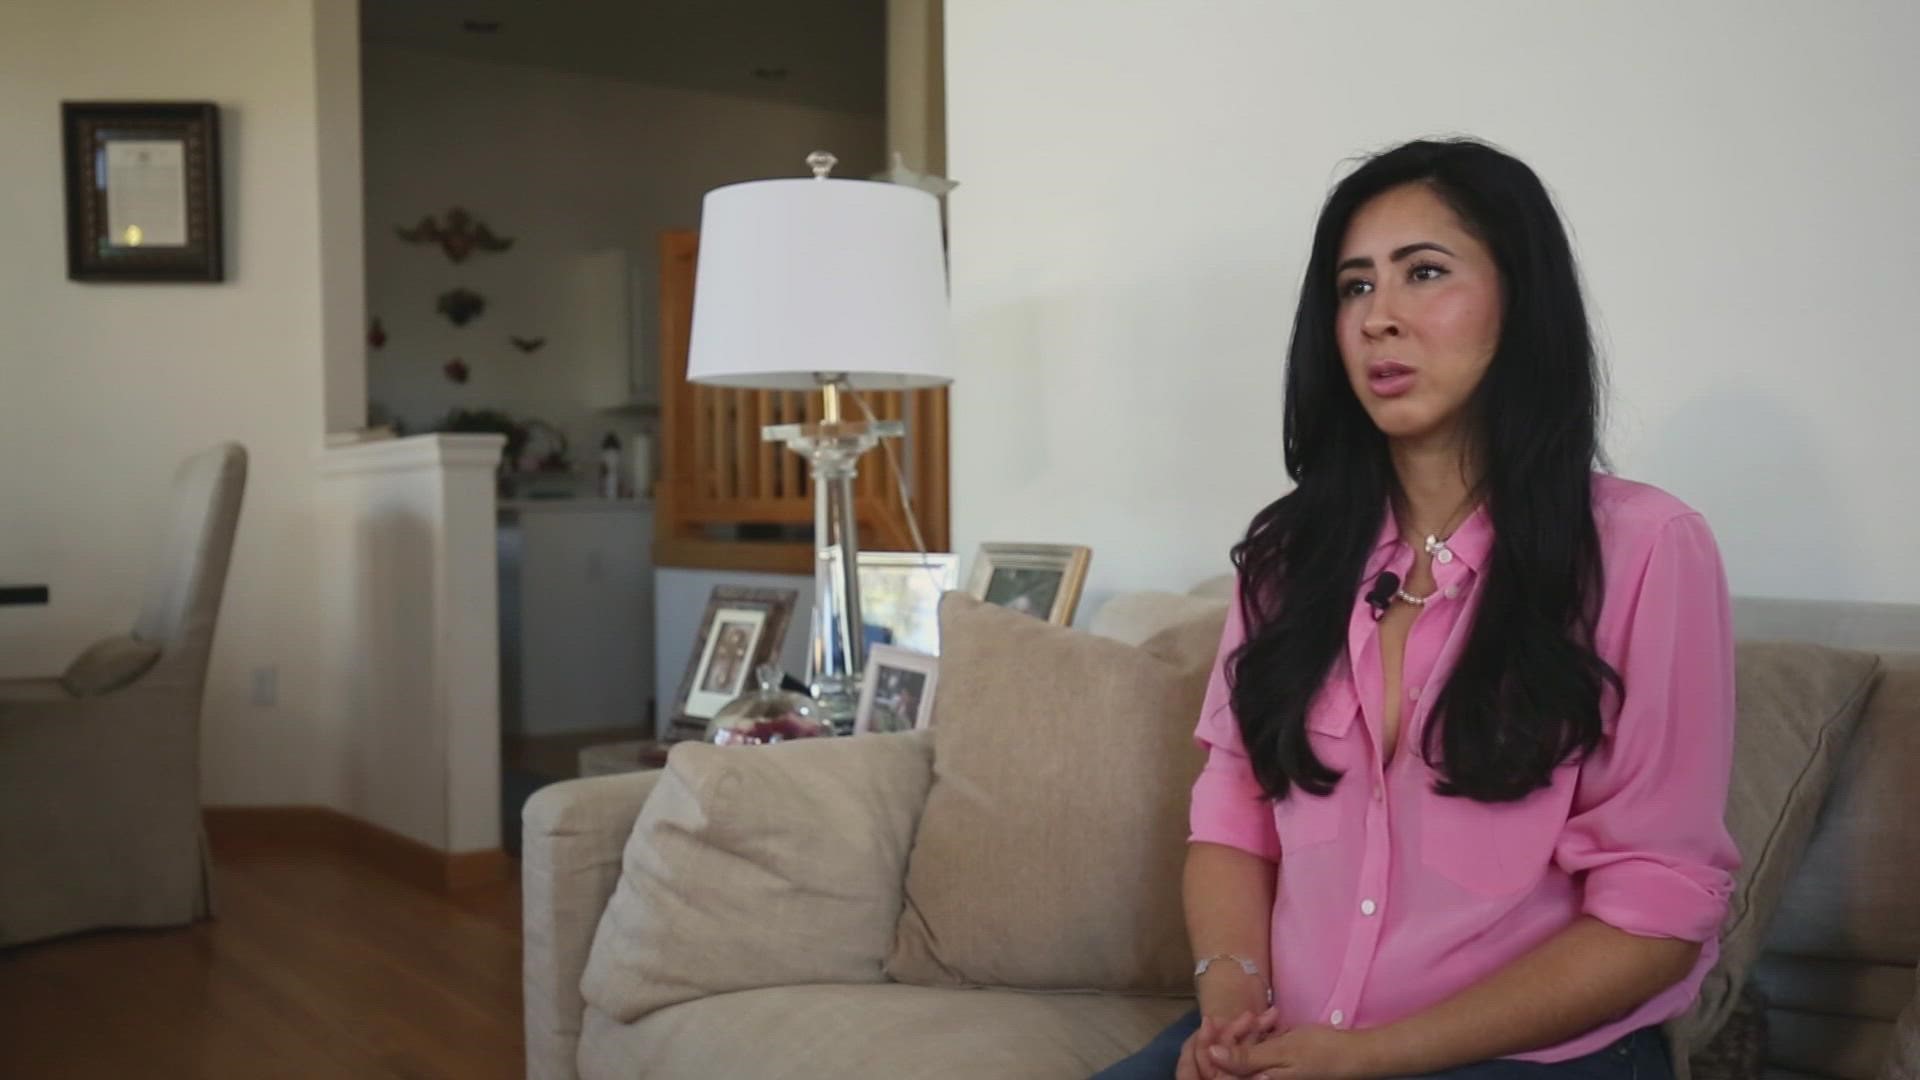 Ana Thallas opens up about the Denver shooting, the sentencing of her daughter's killer and whether she's found closure more than two years after that terrible day.